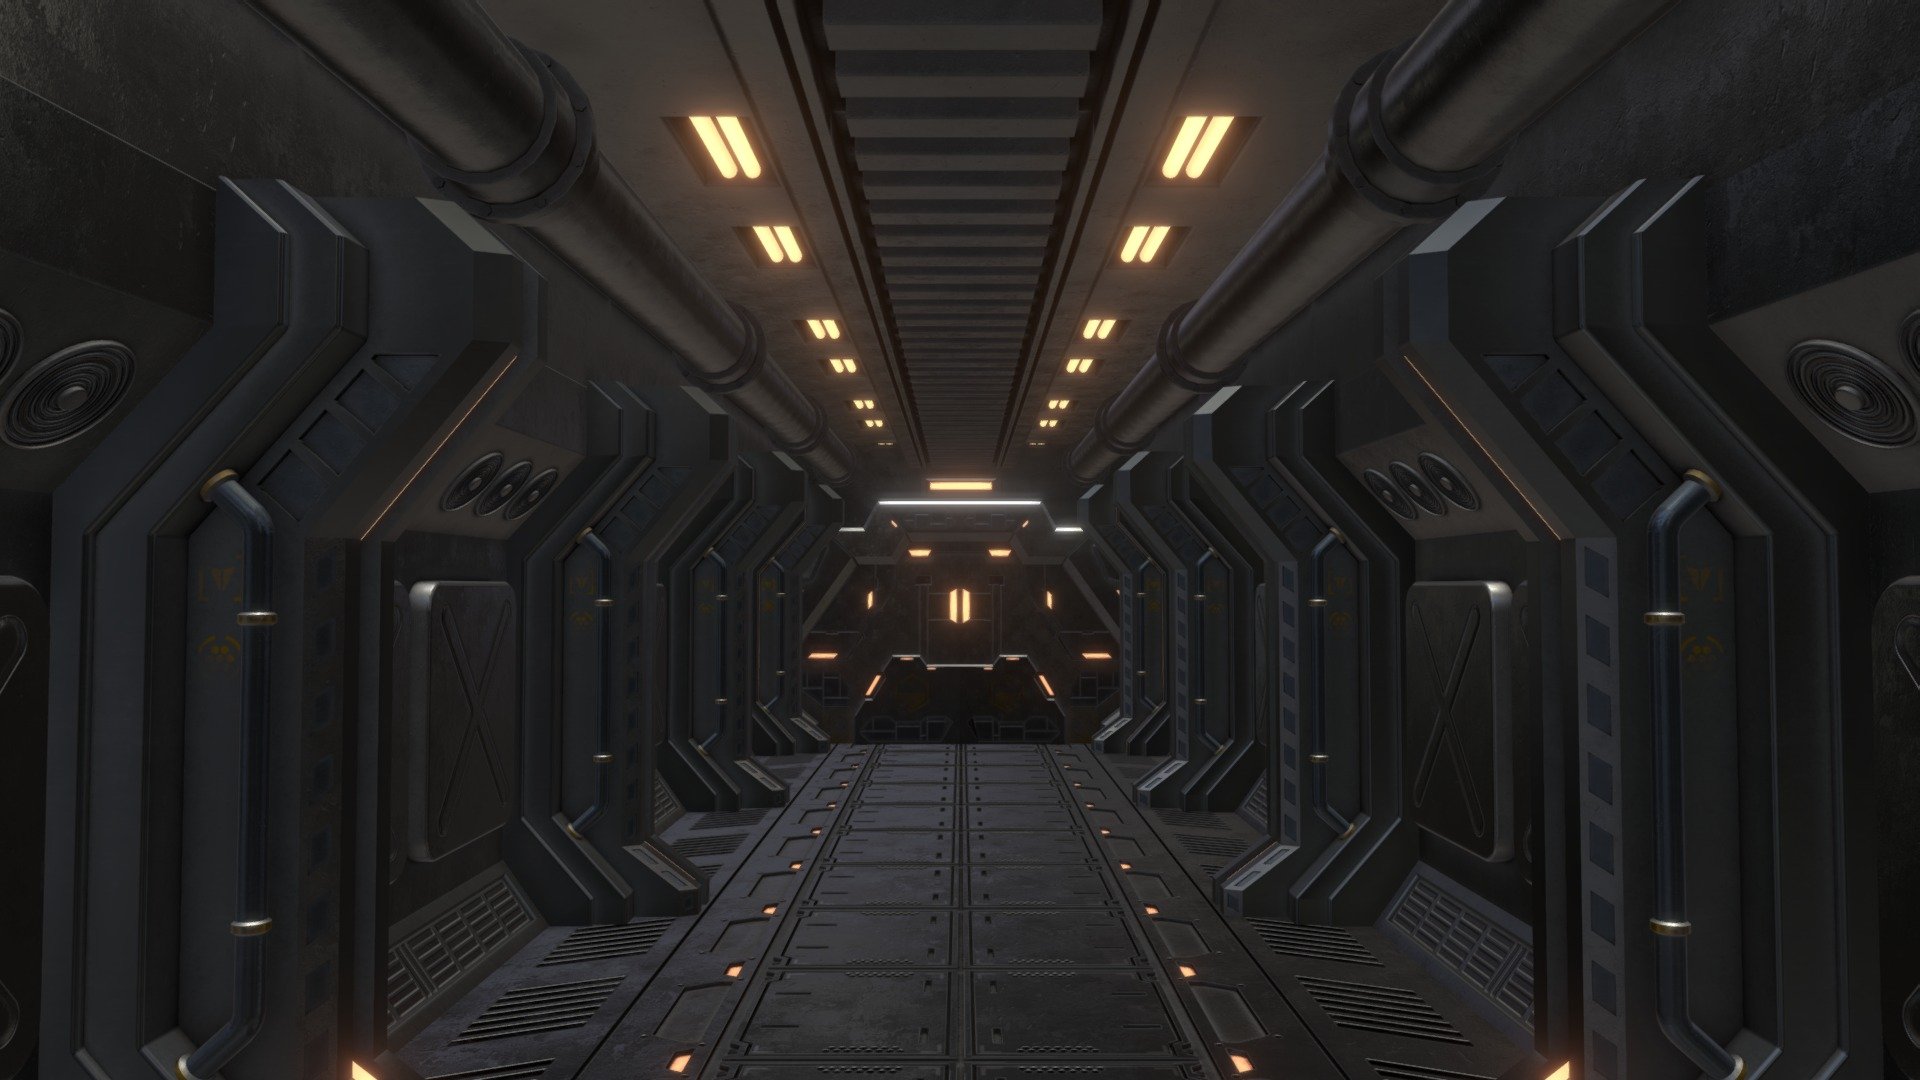 Halo inspired corridor based off the previous door I modeled. This one is my favourite of the six 3d model